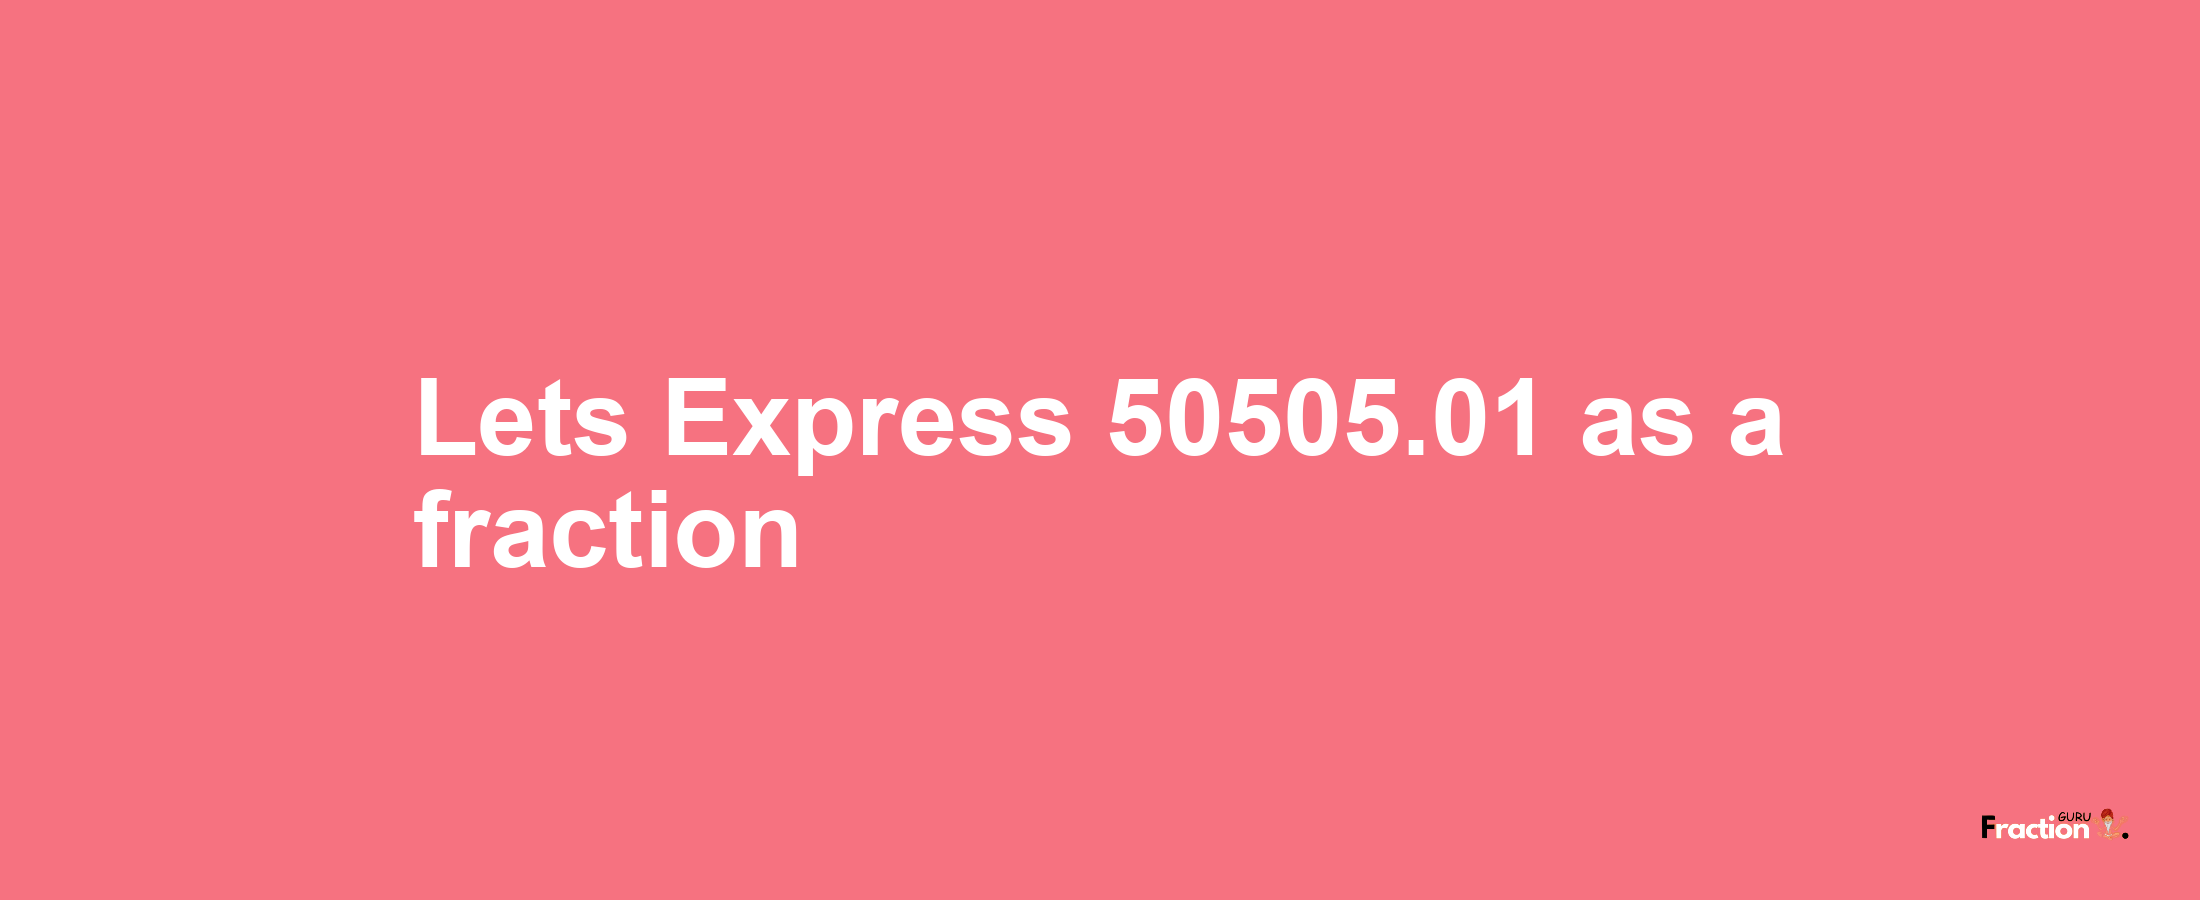 Lets Express 50505.01 as afraction